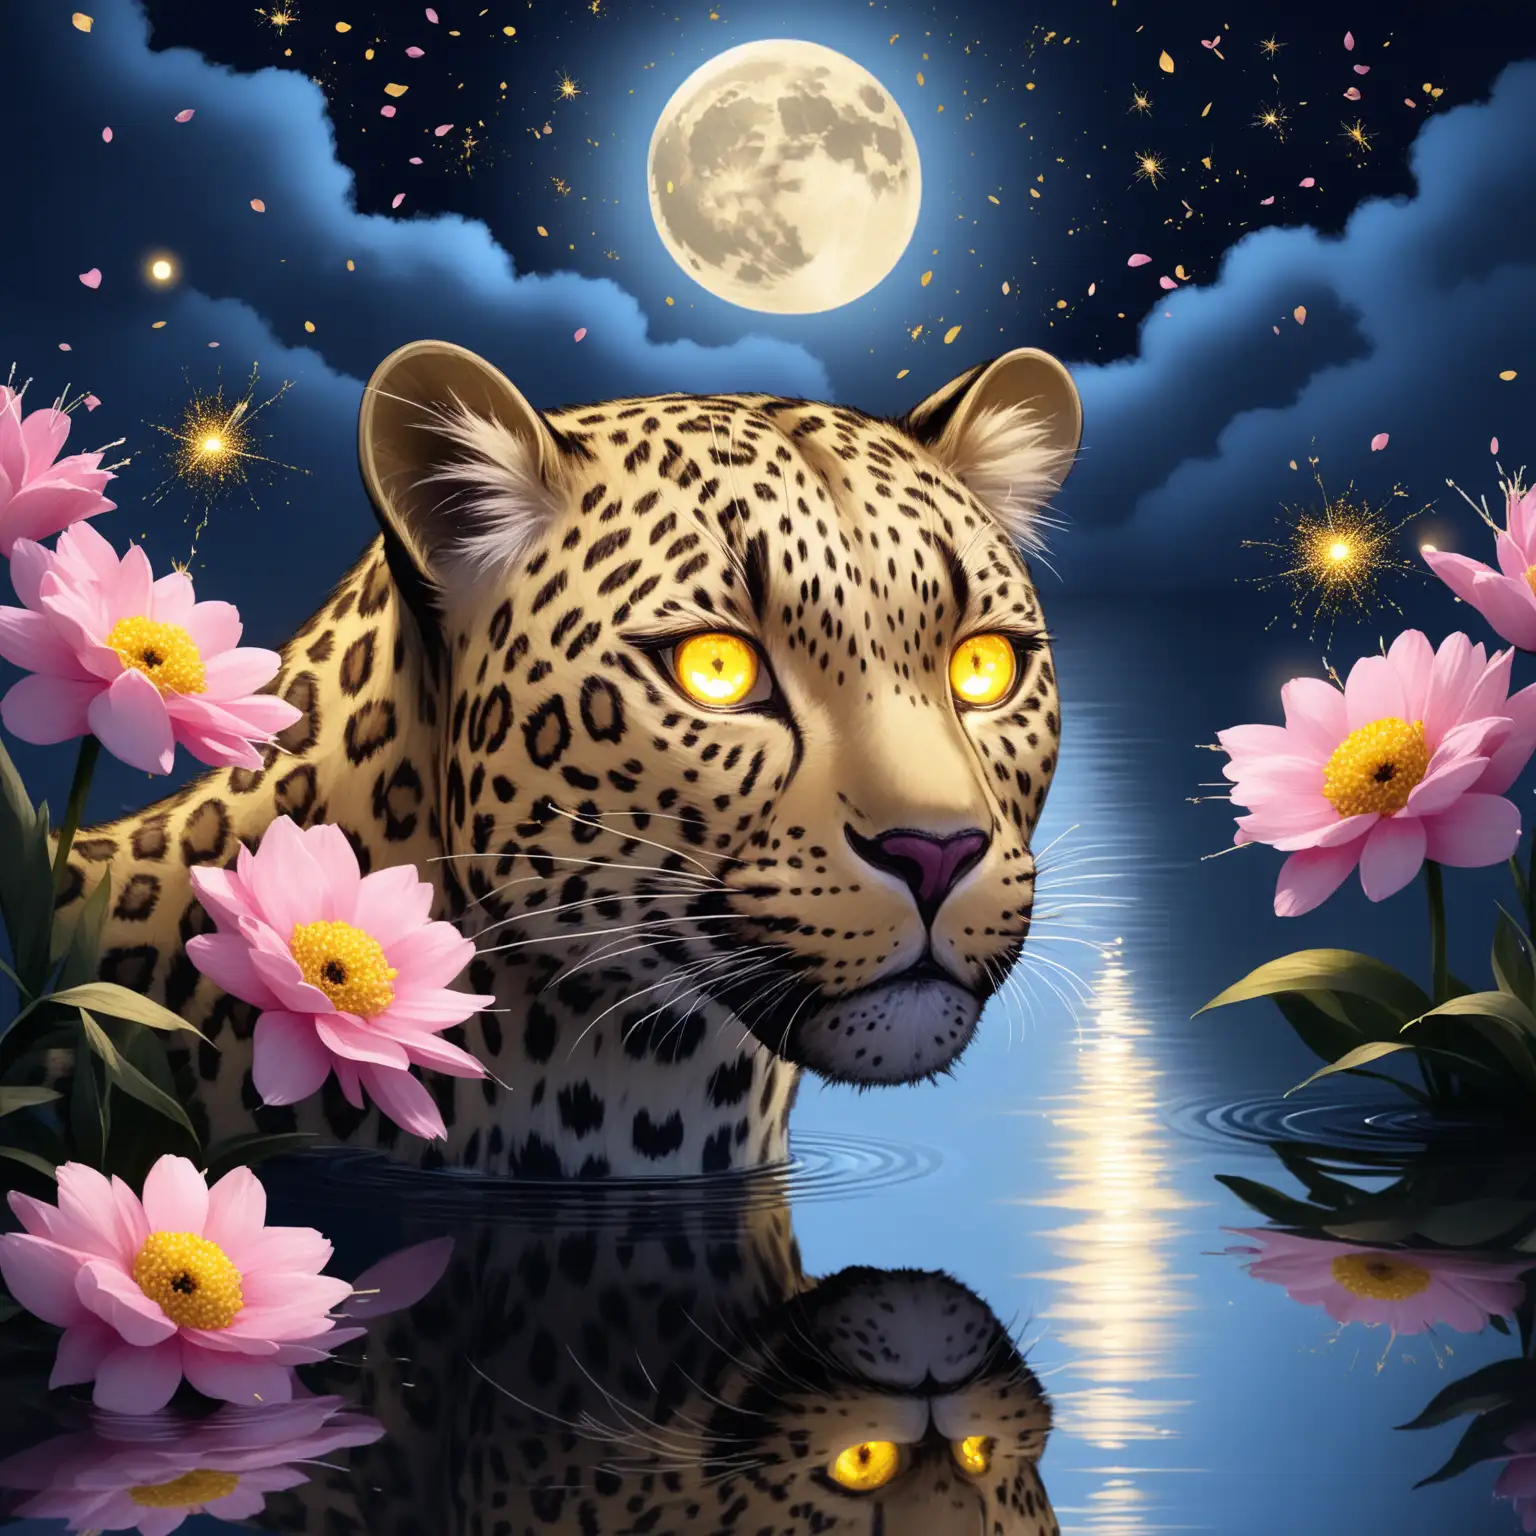 Beautiful leopard, deep yellow led eyes, reflection in water, navy blue and pink flowers, full moon, dark blue fog, gold sparks, close up